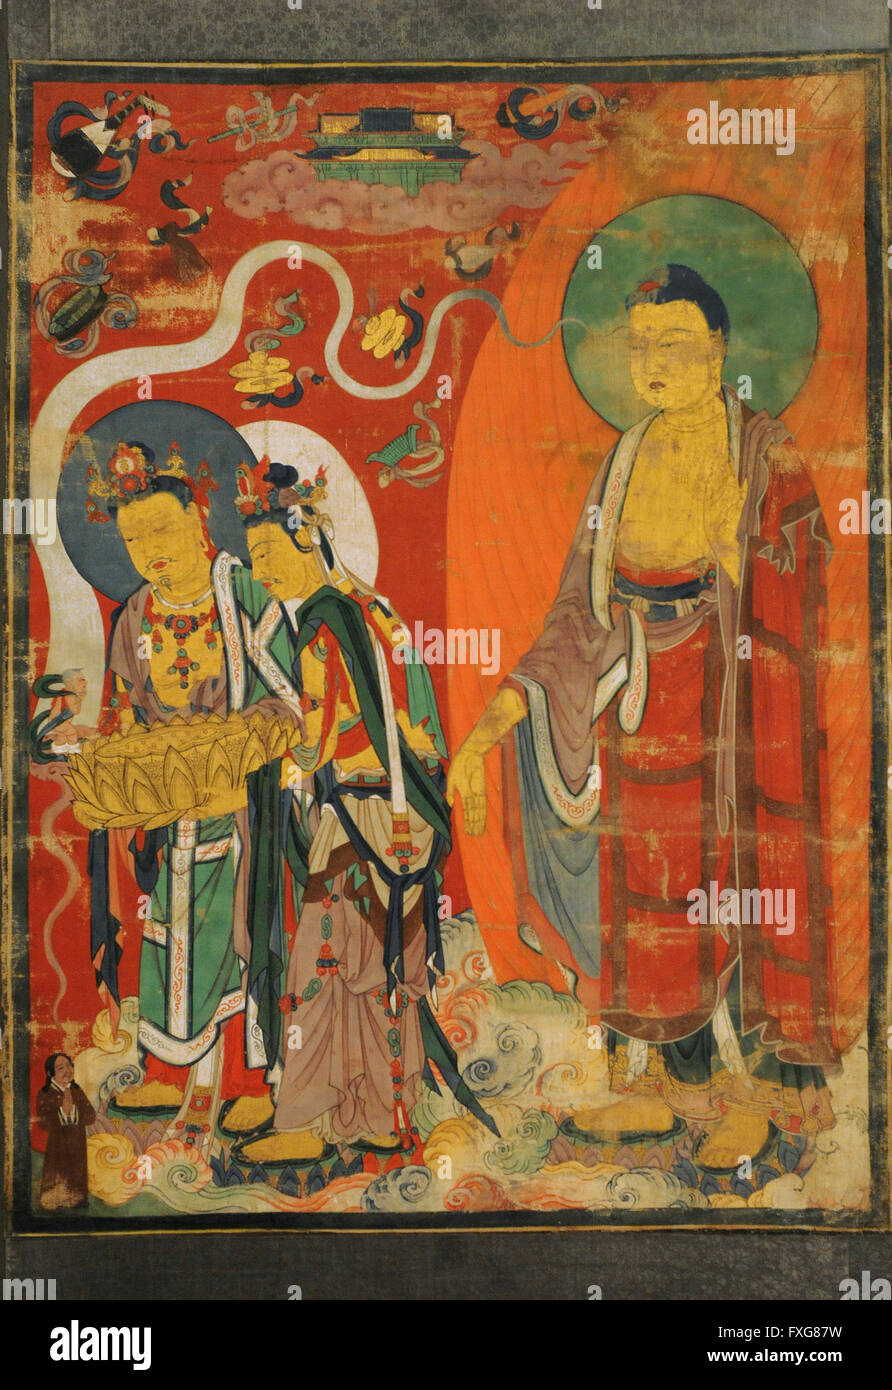 Greeting of the Righteous Man on the Way to the Pure Land of Buddha Amitabha. Tangut State of the Western Xia (982-1227). Khara-Khoto. 13th century. Scroll: colur on cotton.The State Hermitage Museum. Saint Petersburg. Russia. Stock Photo